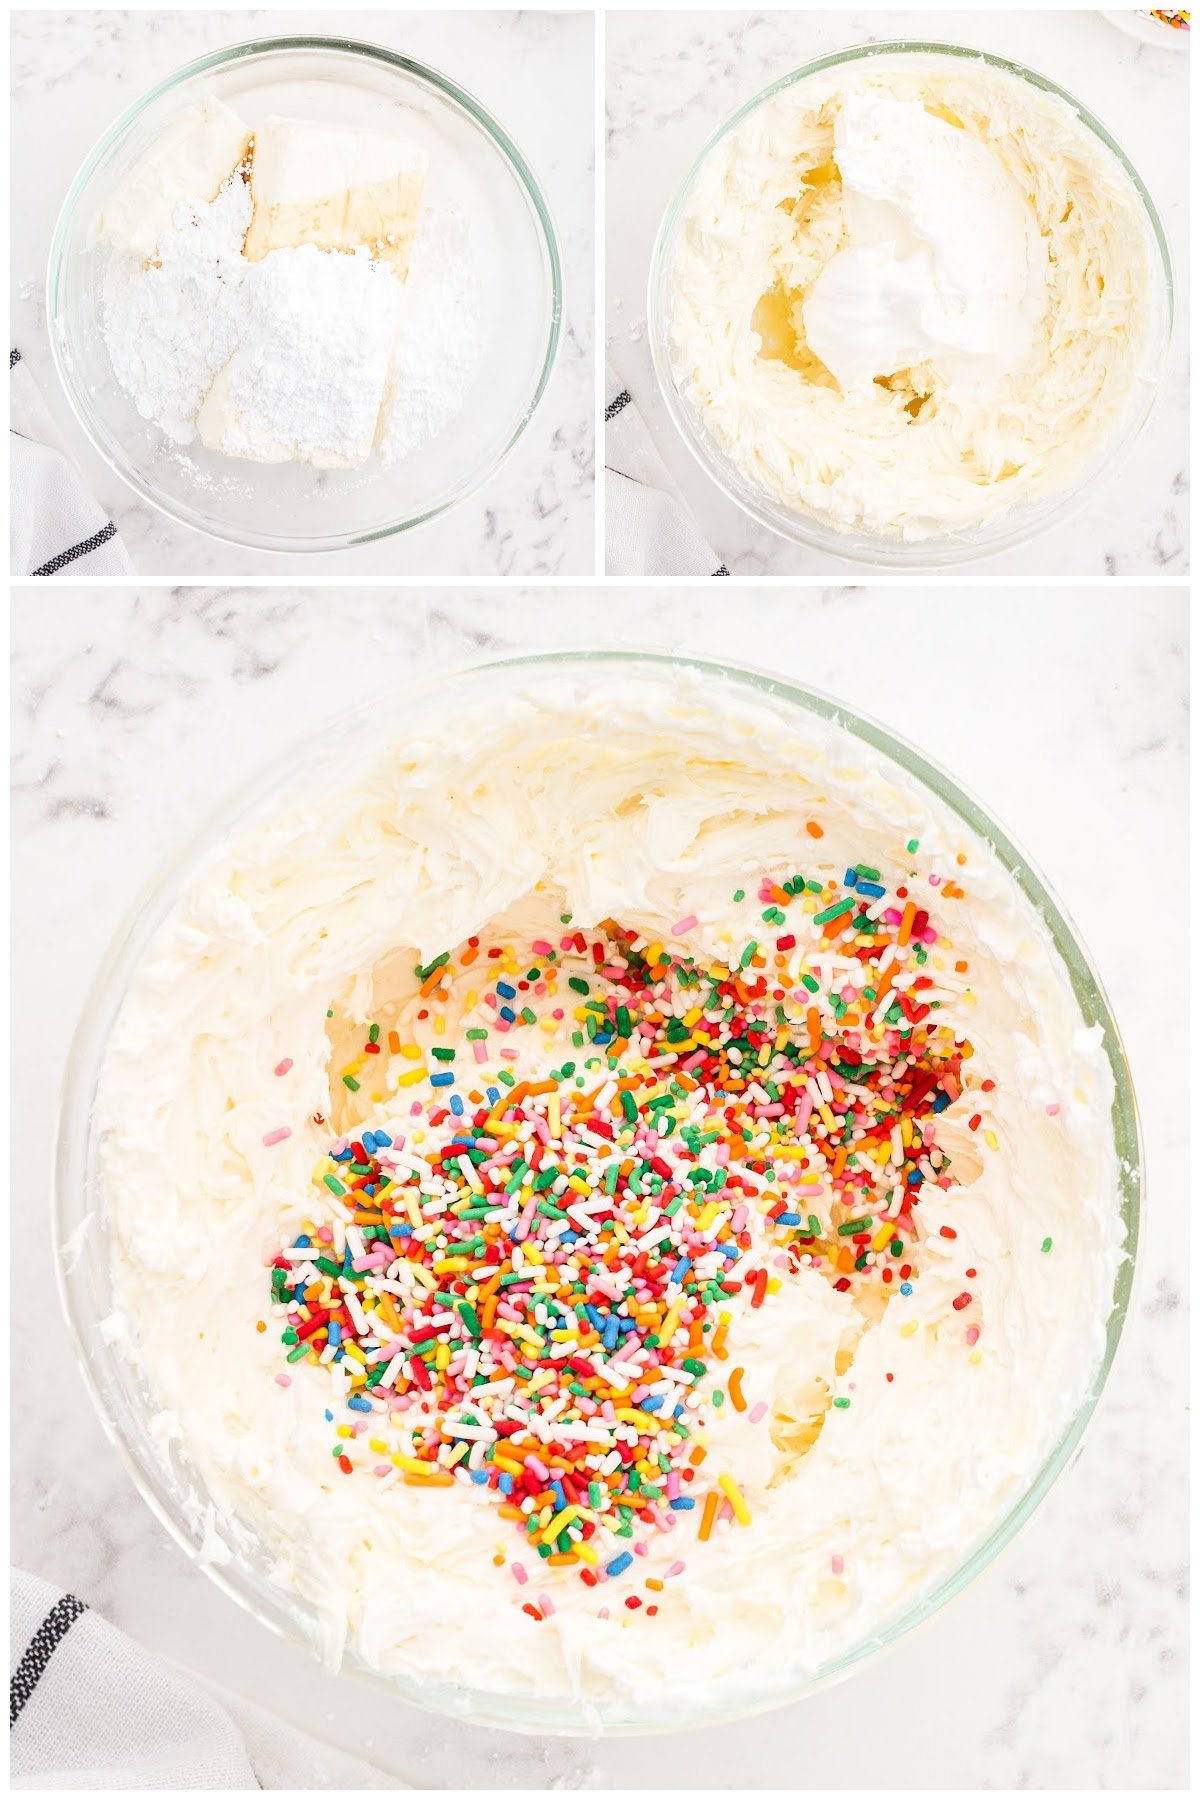 Mixing the cheesecake layer and adding in the colored sprinkles into the mixture.